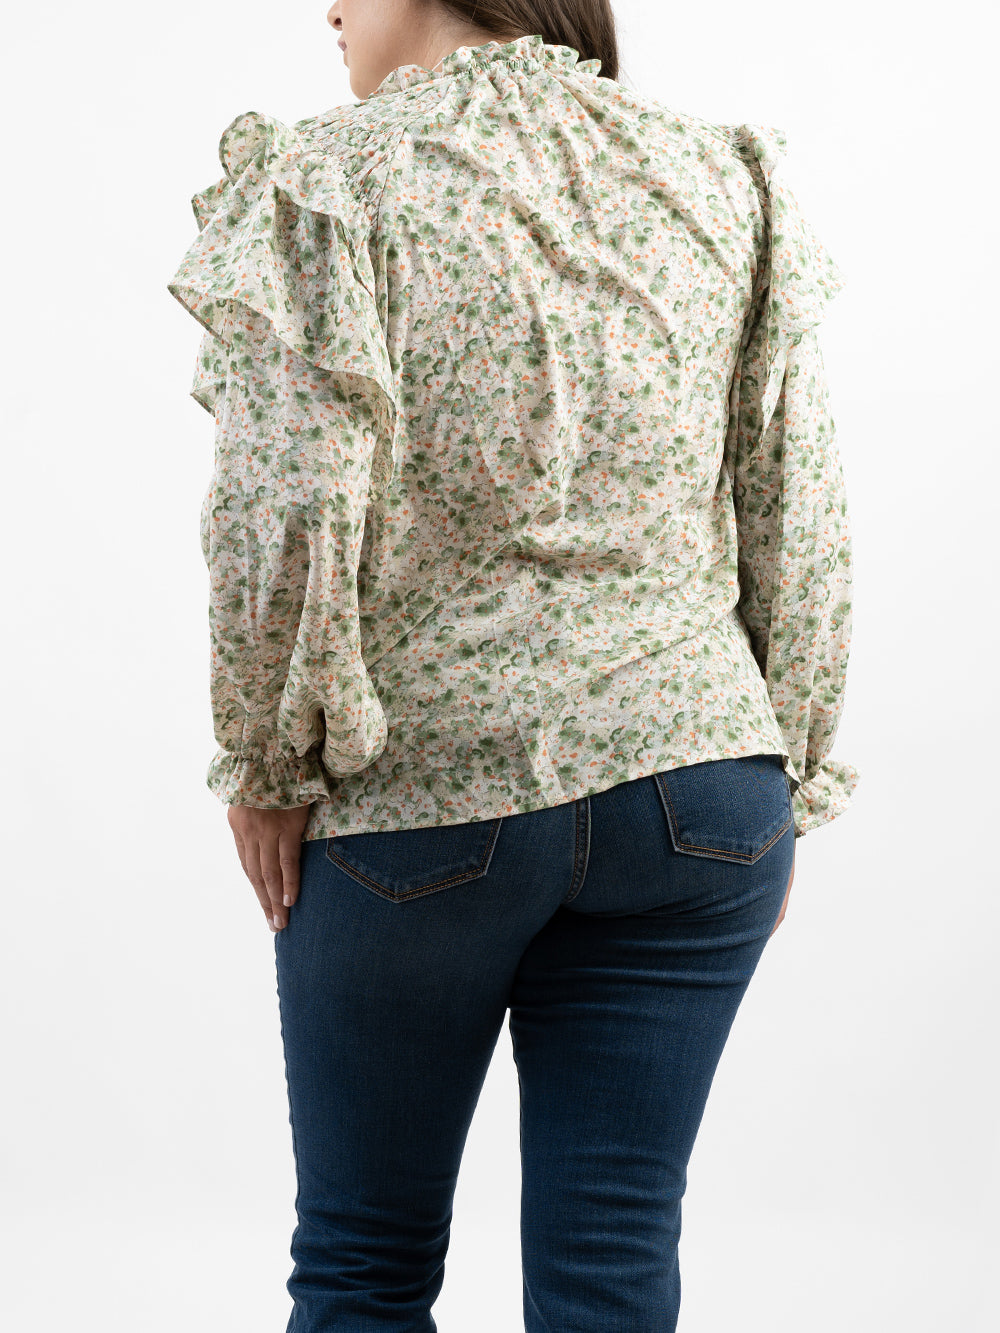 Plus Size Women Floral Print Tie Shirred Blouse - Cowgirl Wear